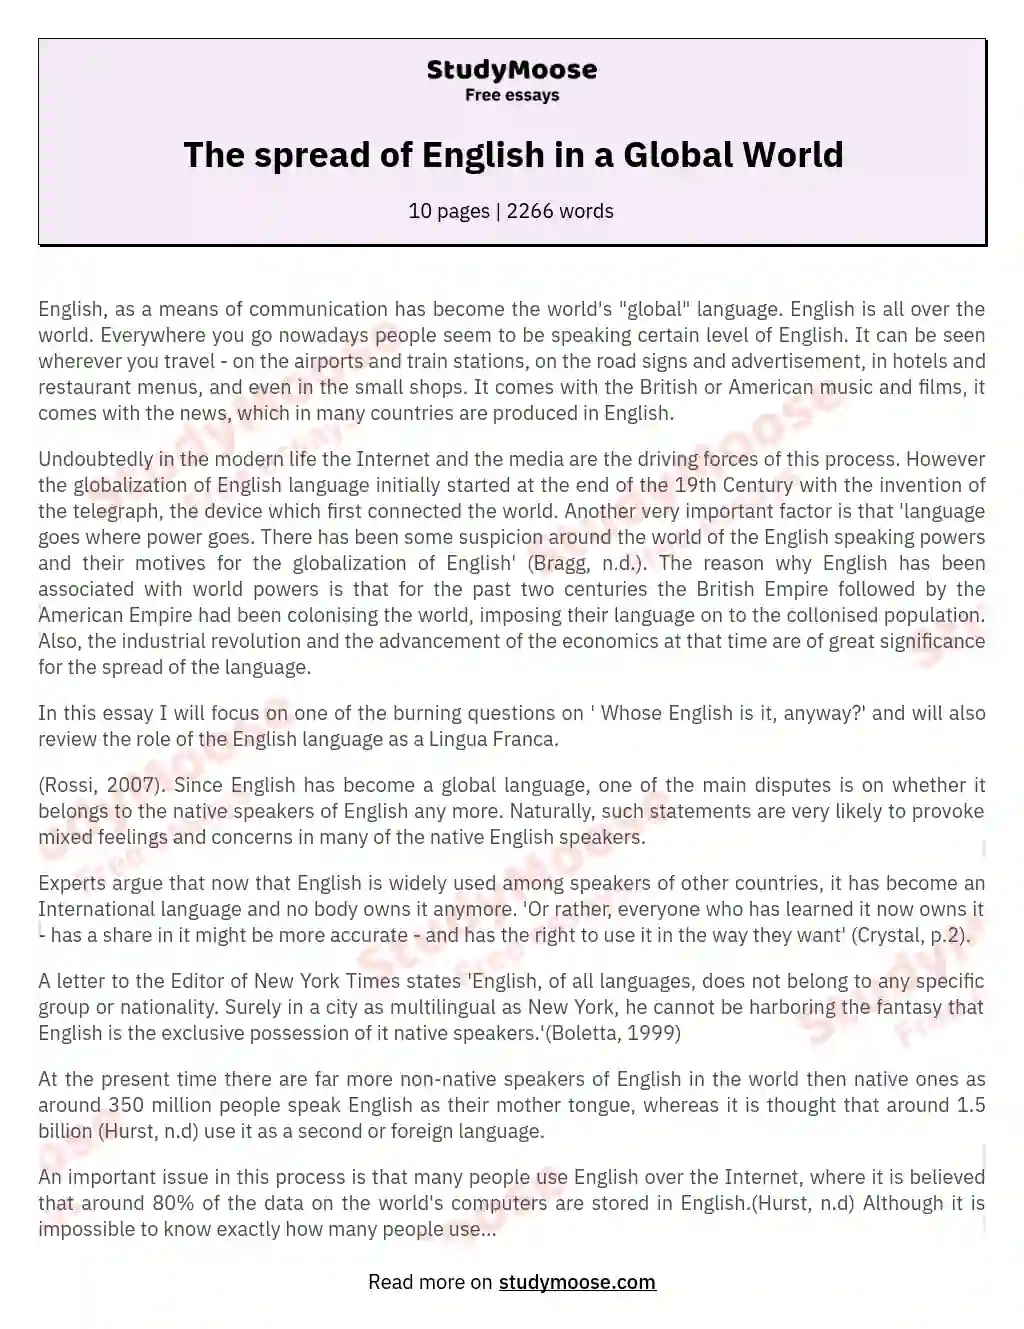 The spread of English in a Global World essay